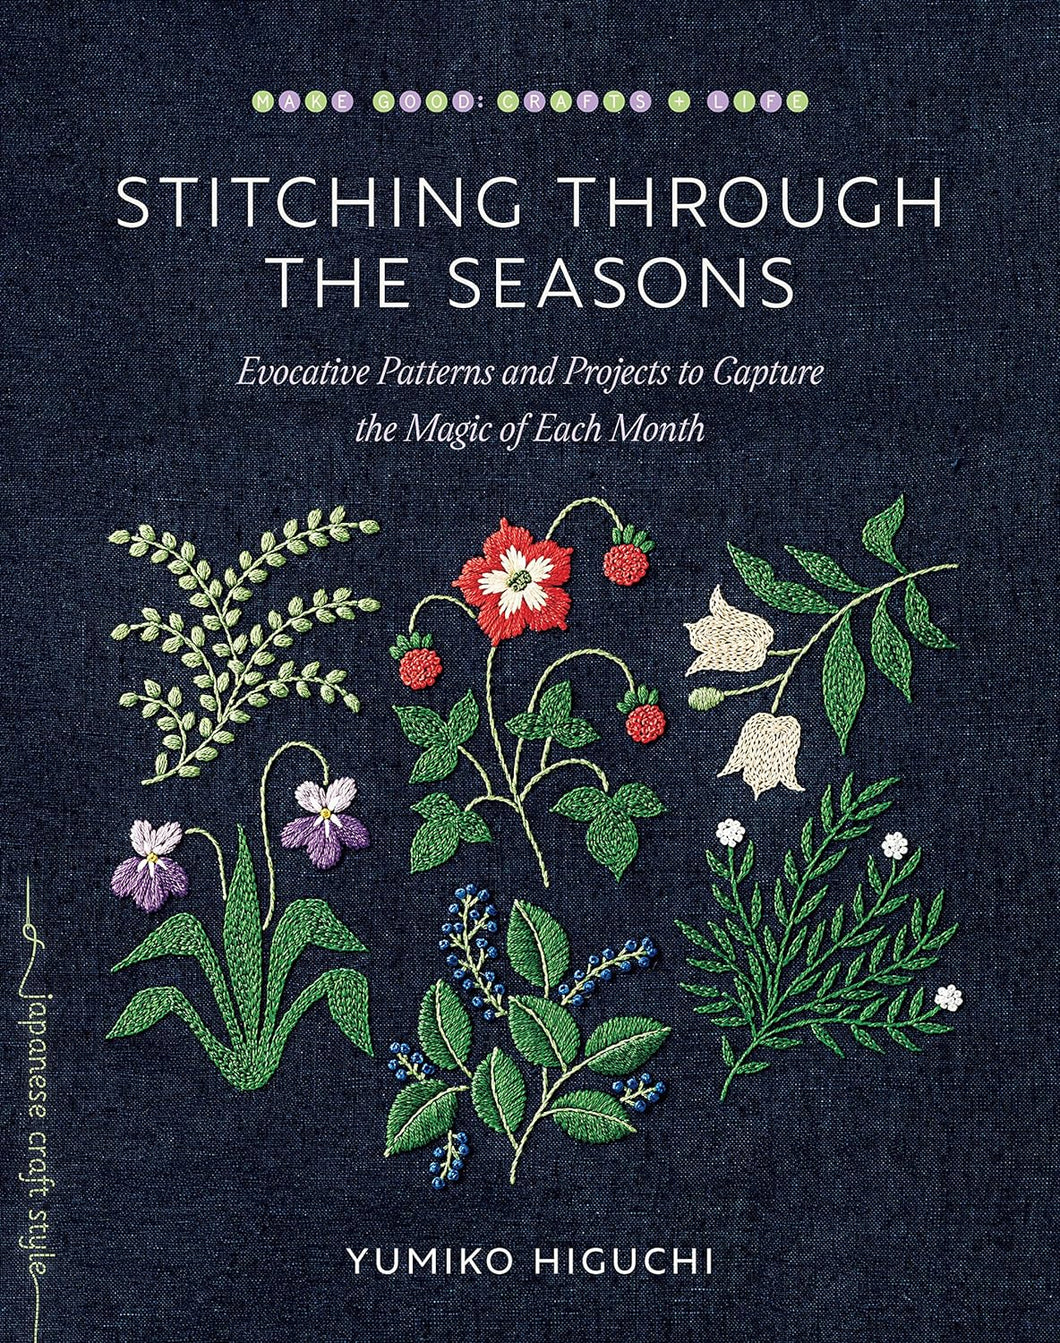 Stitching Through The Seasons: Evocative Patterns And Projects To Capture The Magic Of Each Month [Yumiko Higuchi]